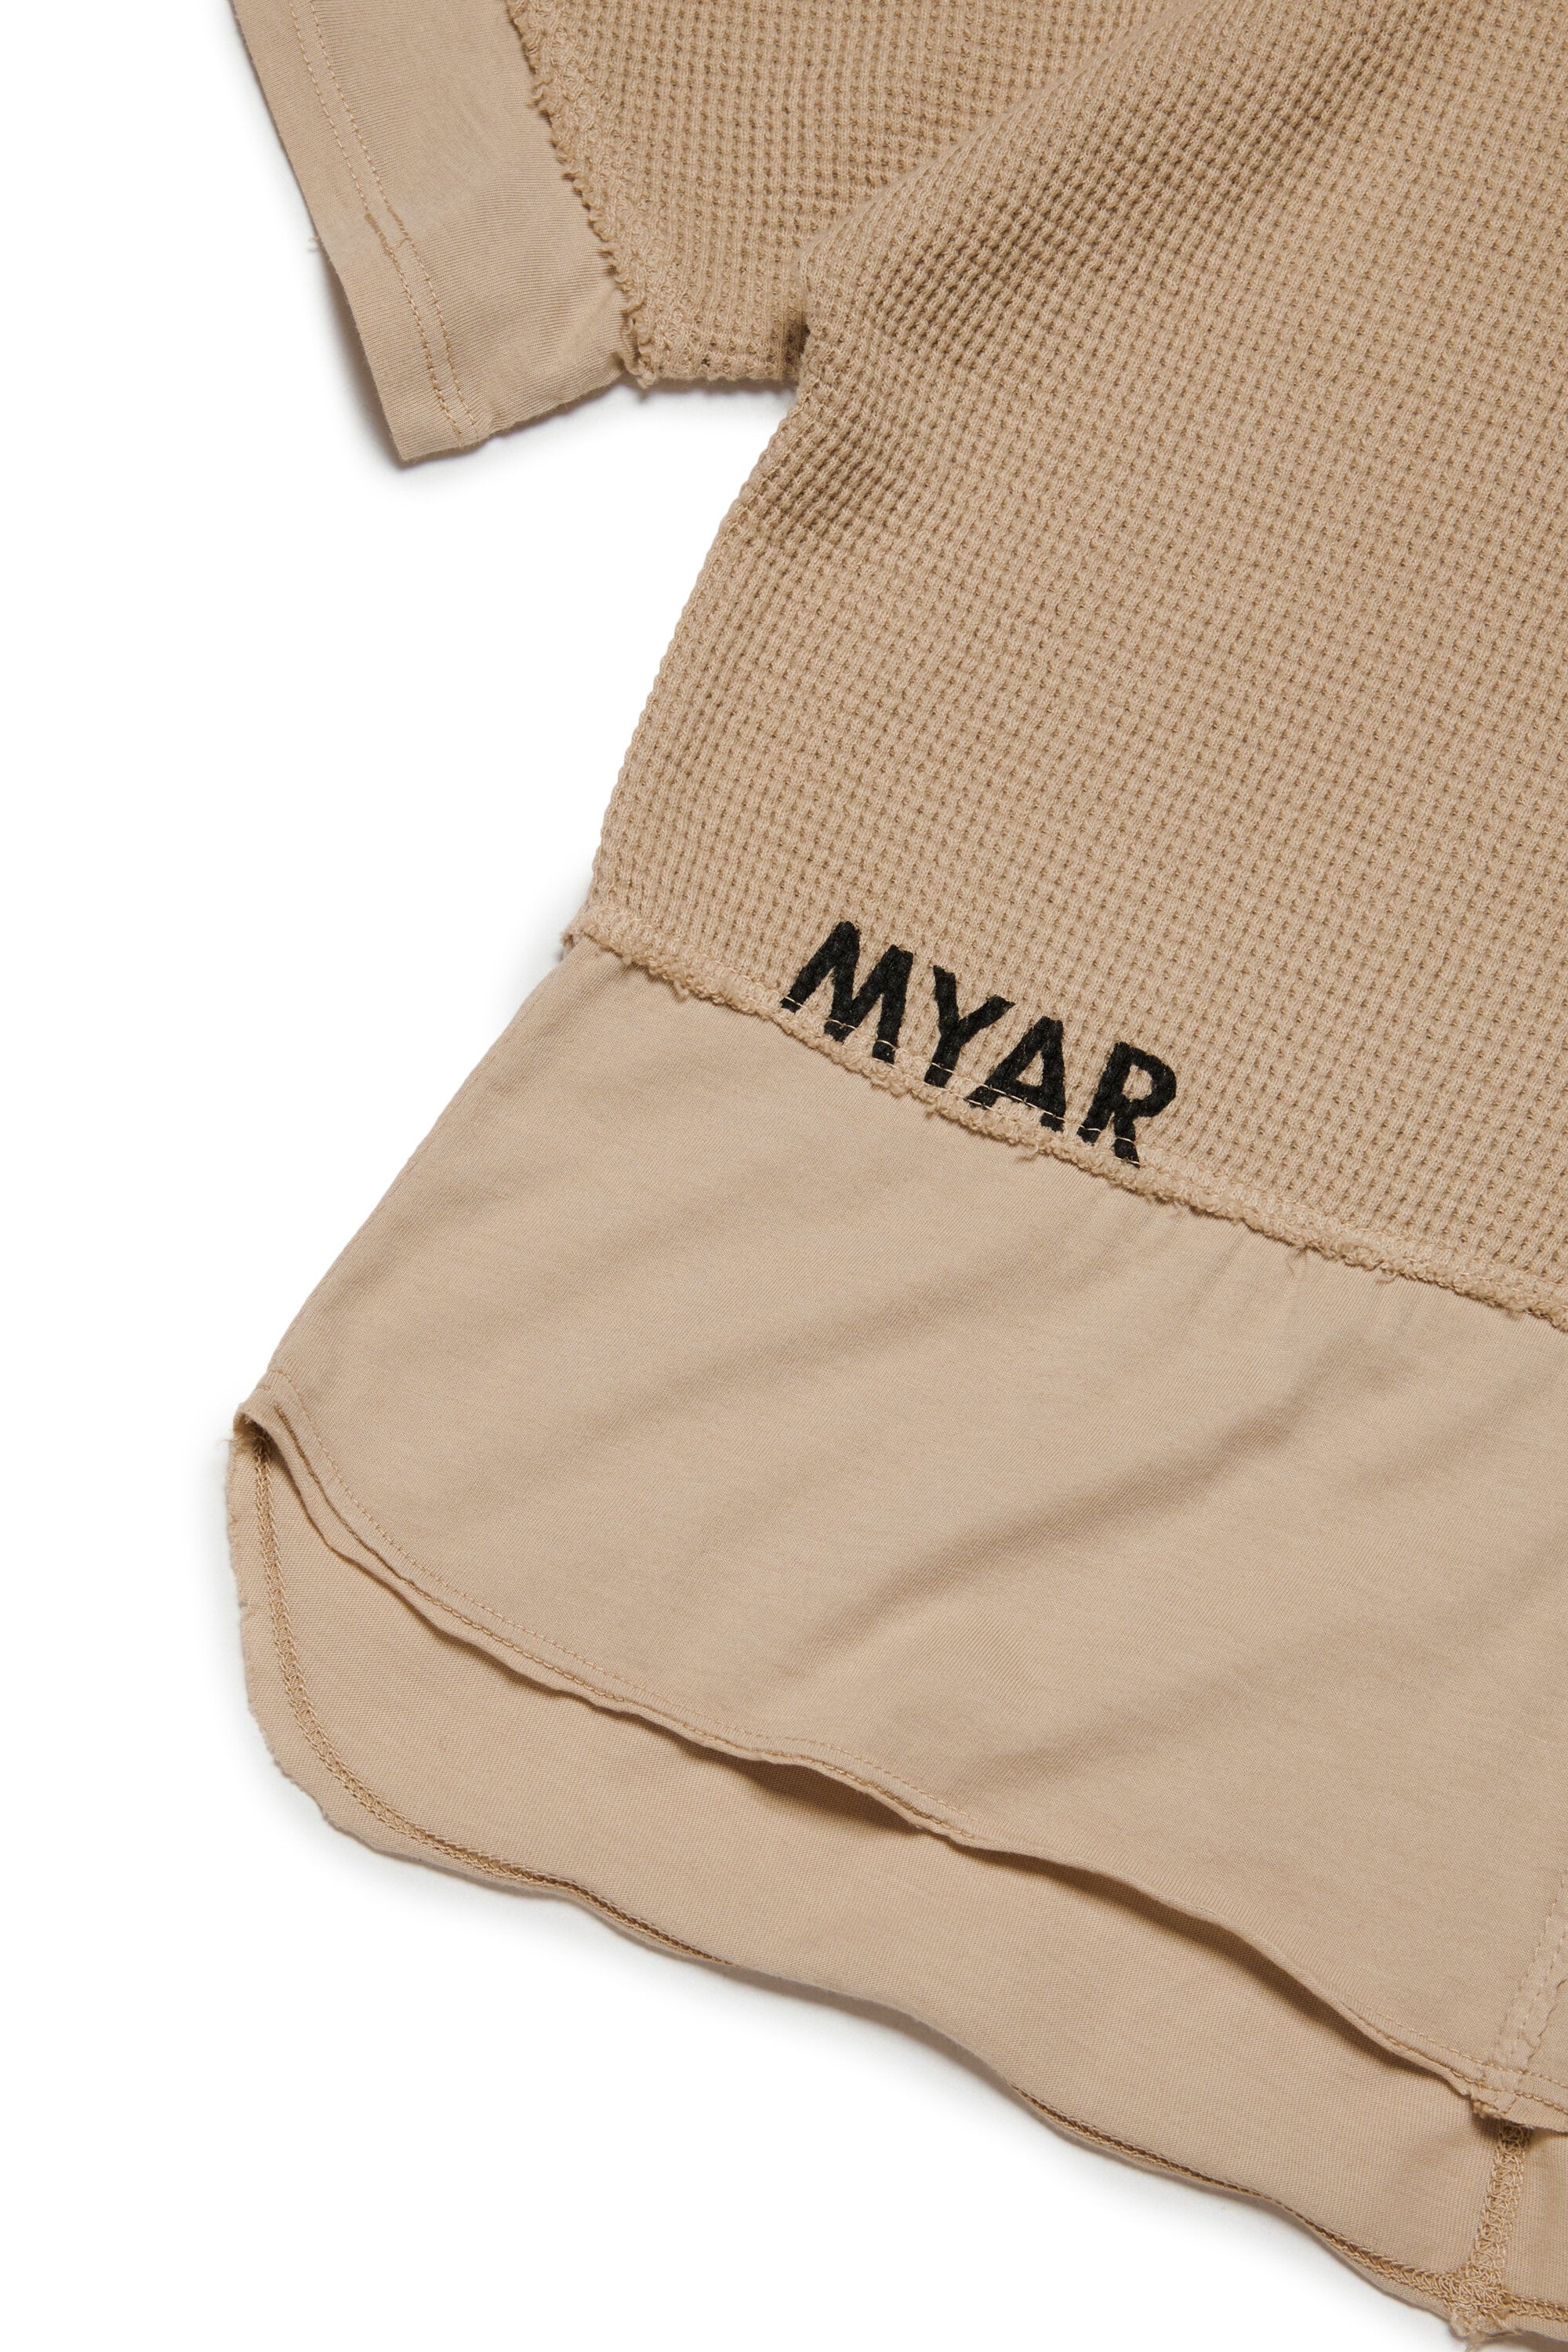 Deadstock fabric T-shirt with MYAR logo